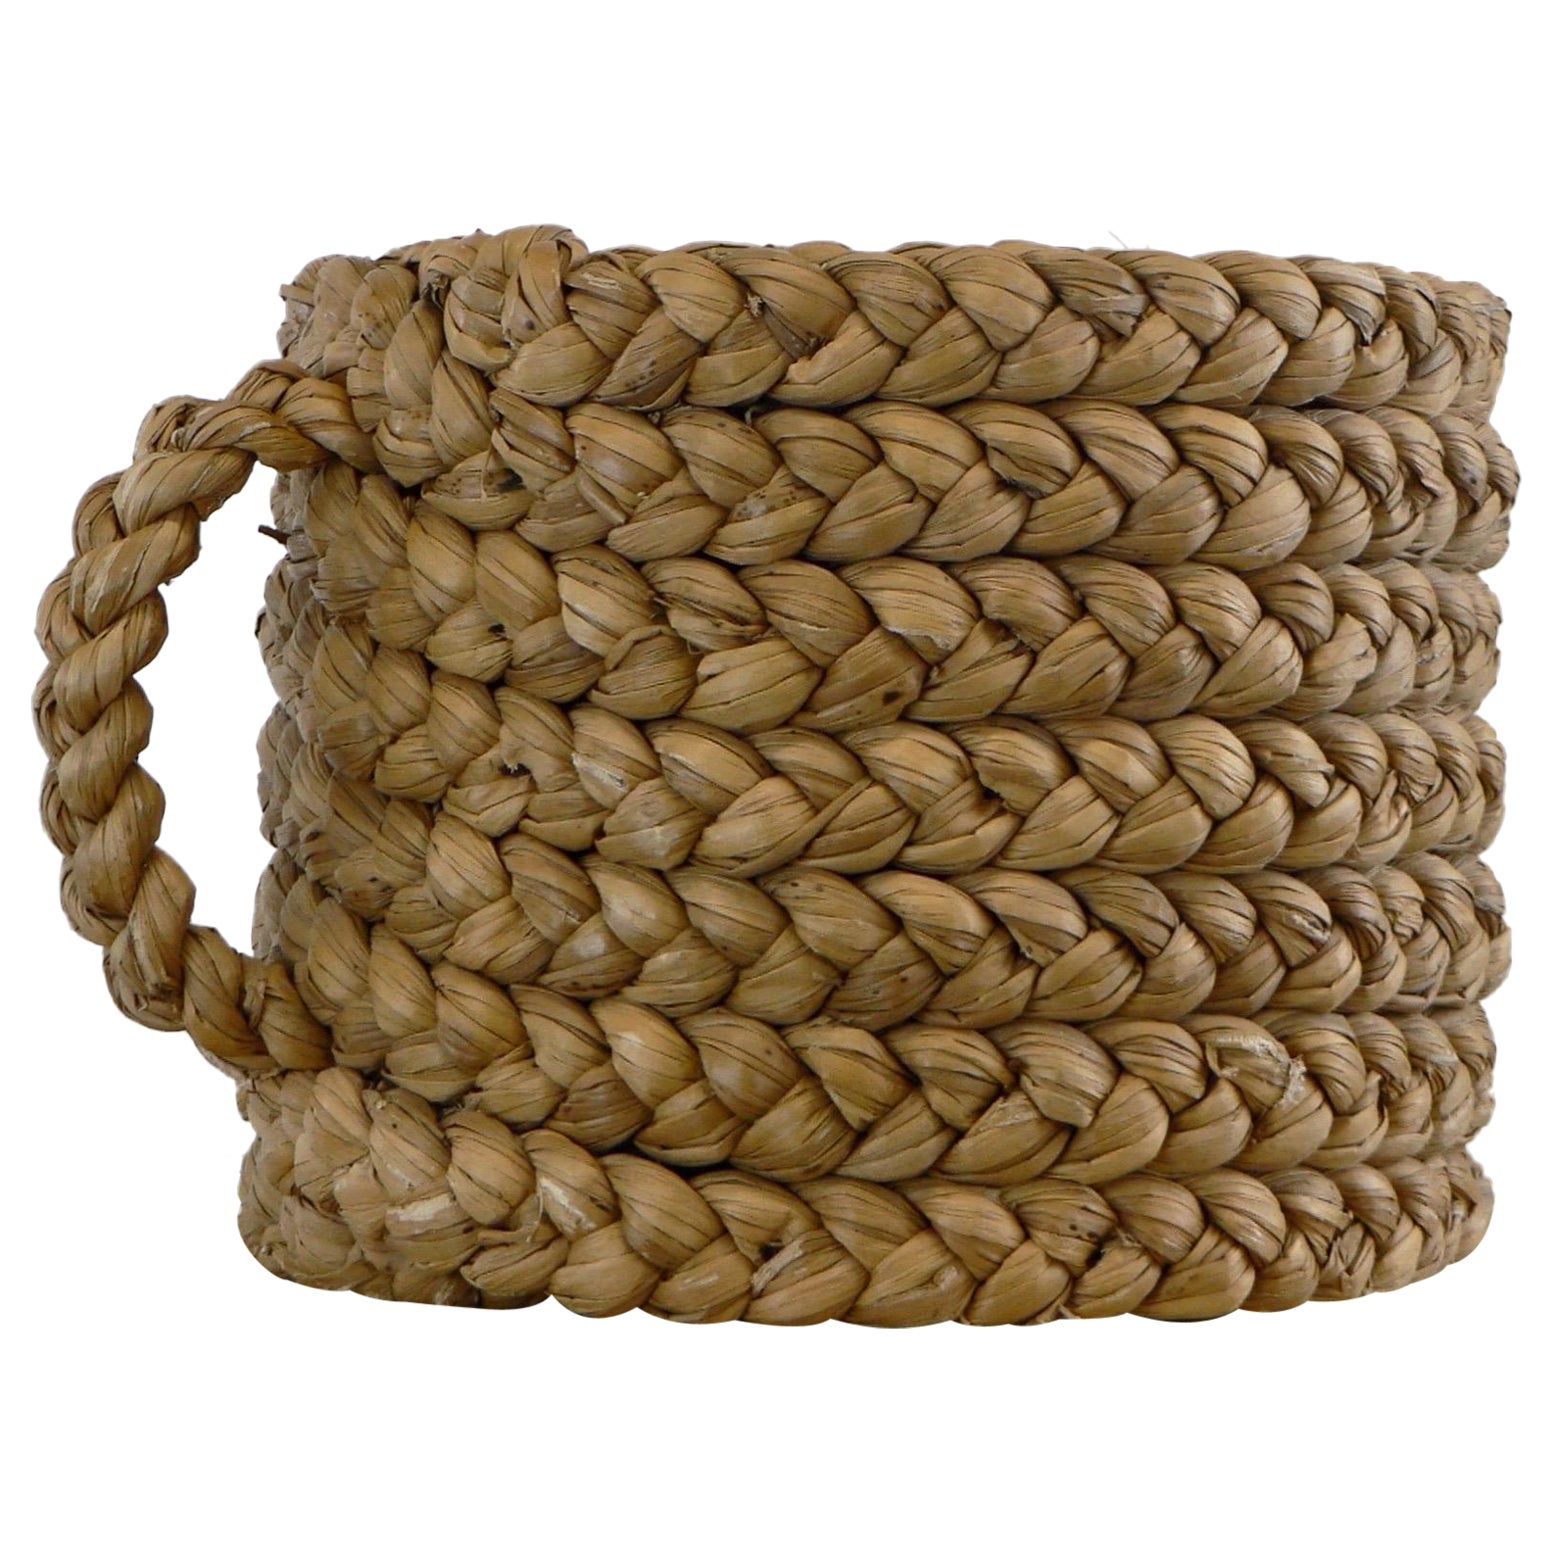 Champagne Bucket with Sisal Woven Exterior by Audoux and Minet France 1950 For Sale